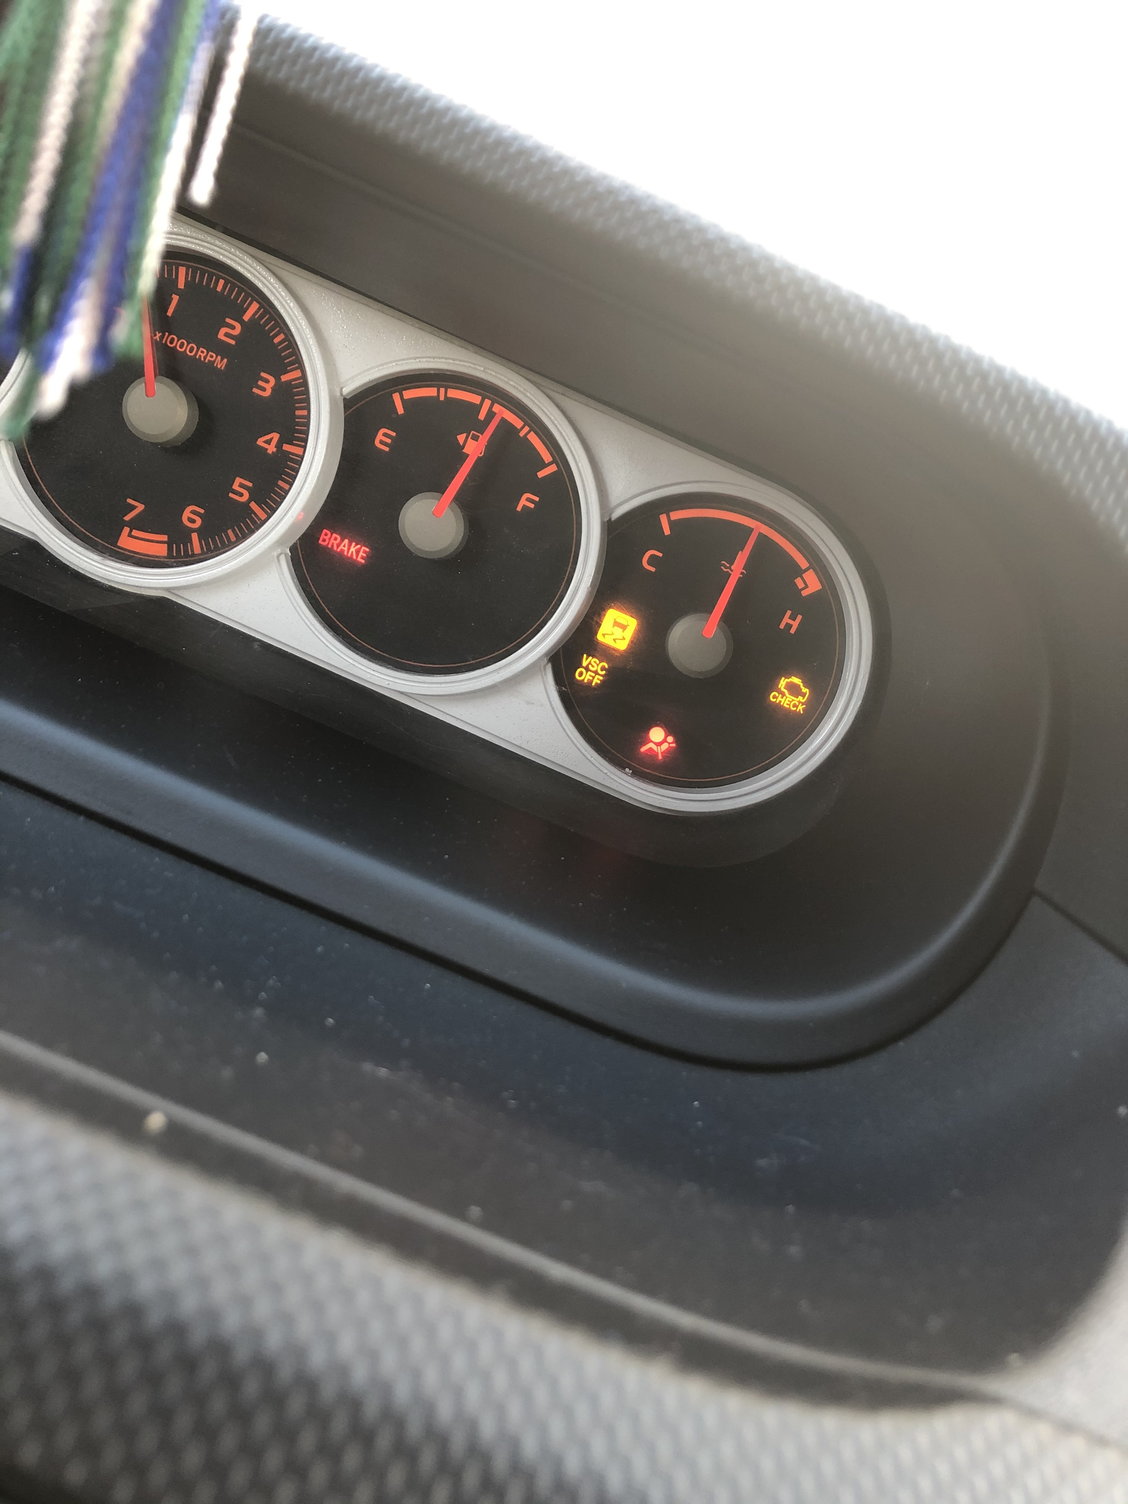 Vsc Traction Control And Engine Light